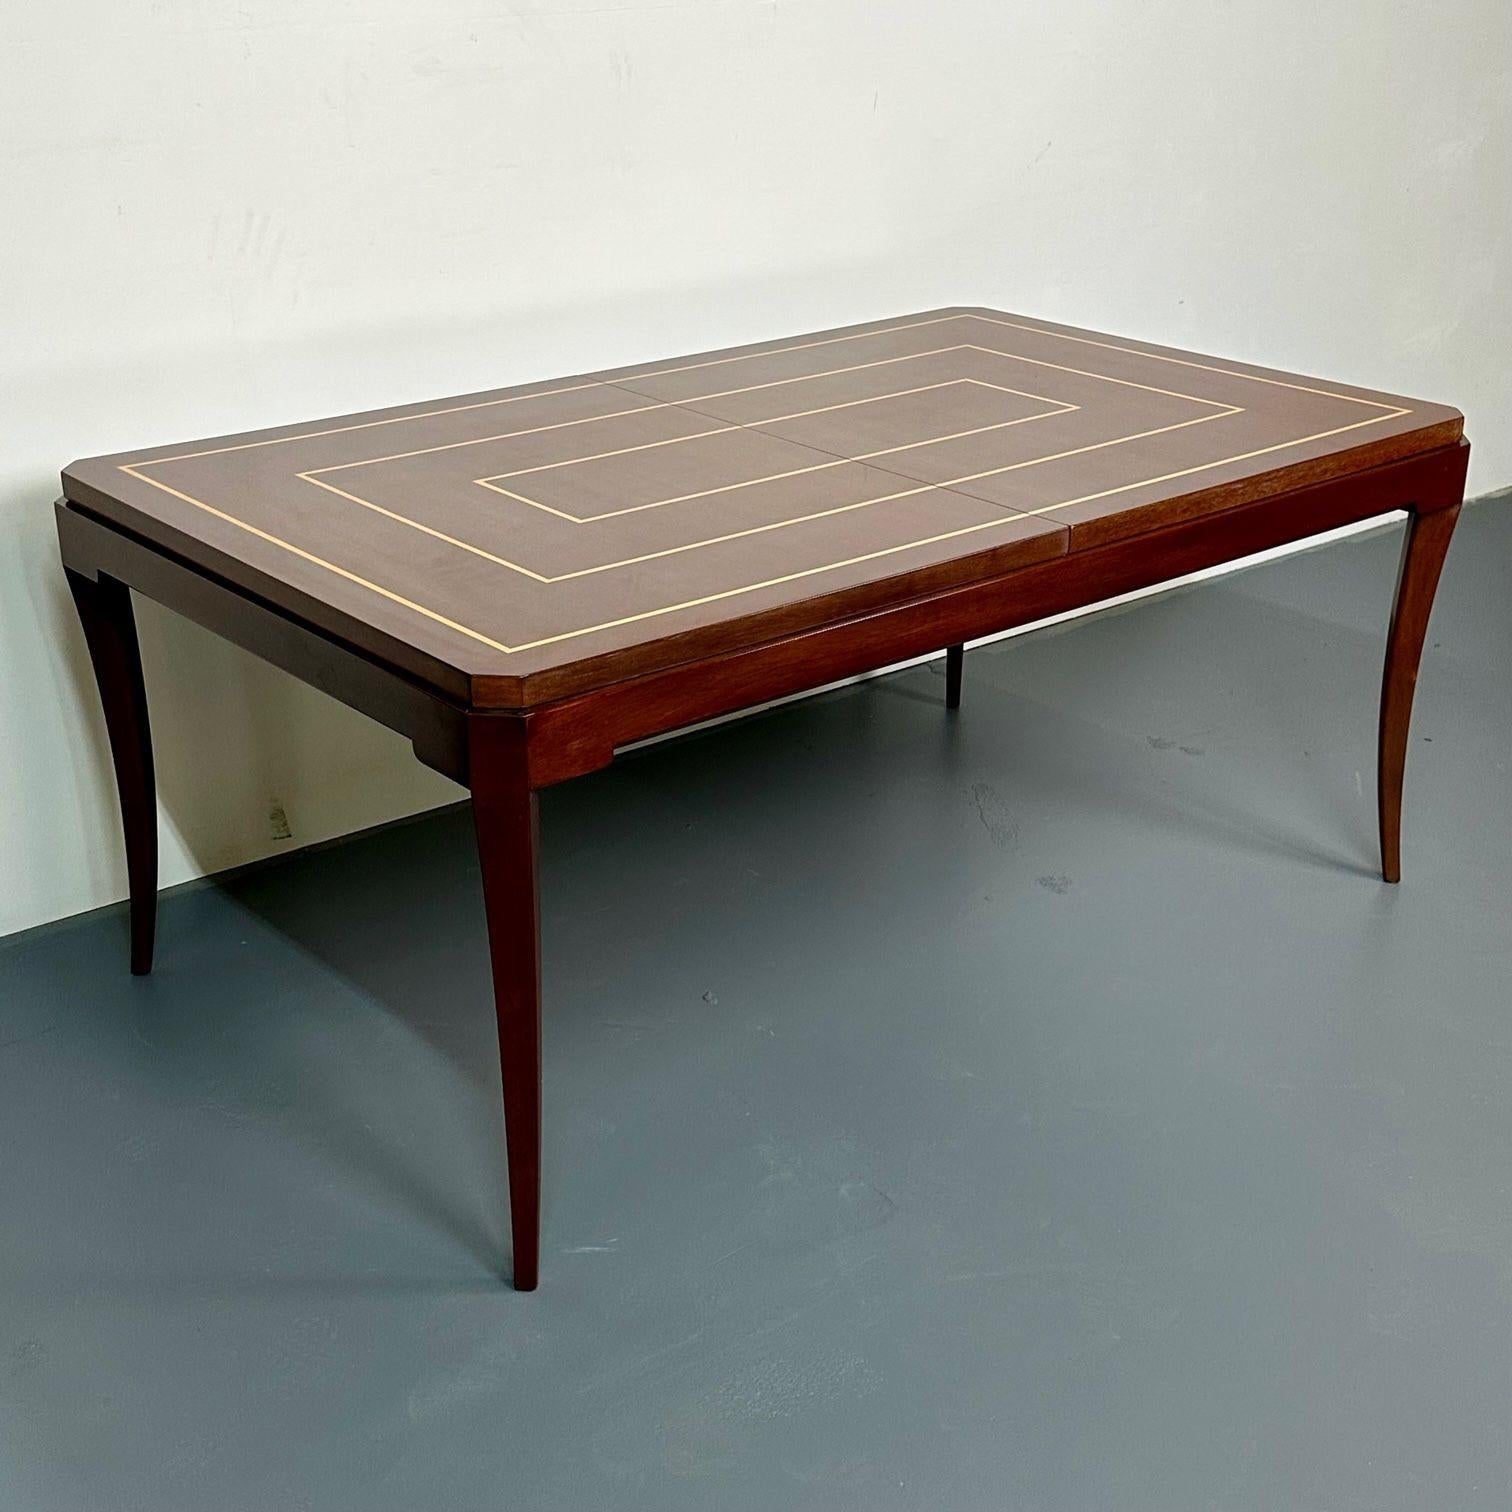 Parzinger Originals, Mid Century Modern Dining Table, 2 Leaves, Mahogany, Inlaid
A stunning mahogany and satinwood inlaid dining or conference table. This large and impressive dining table is stamped Parzinger Originals circa 1955 in its original